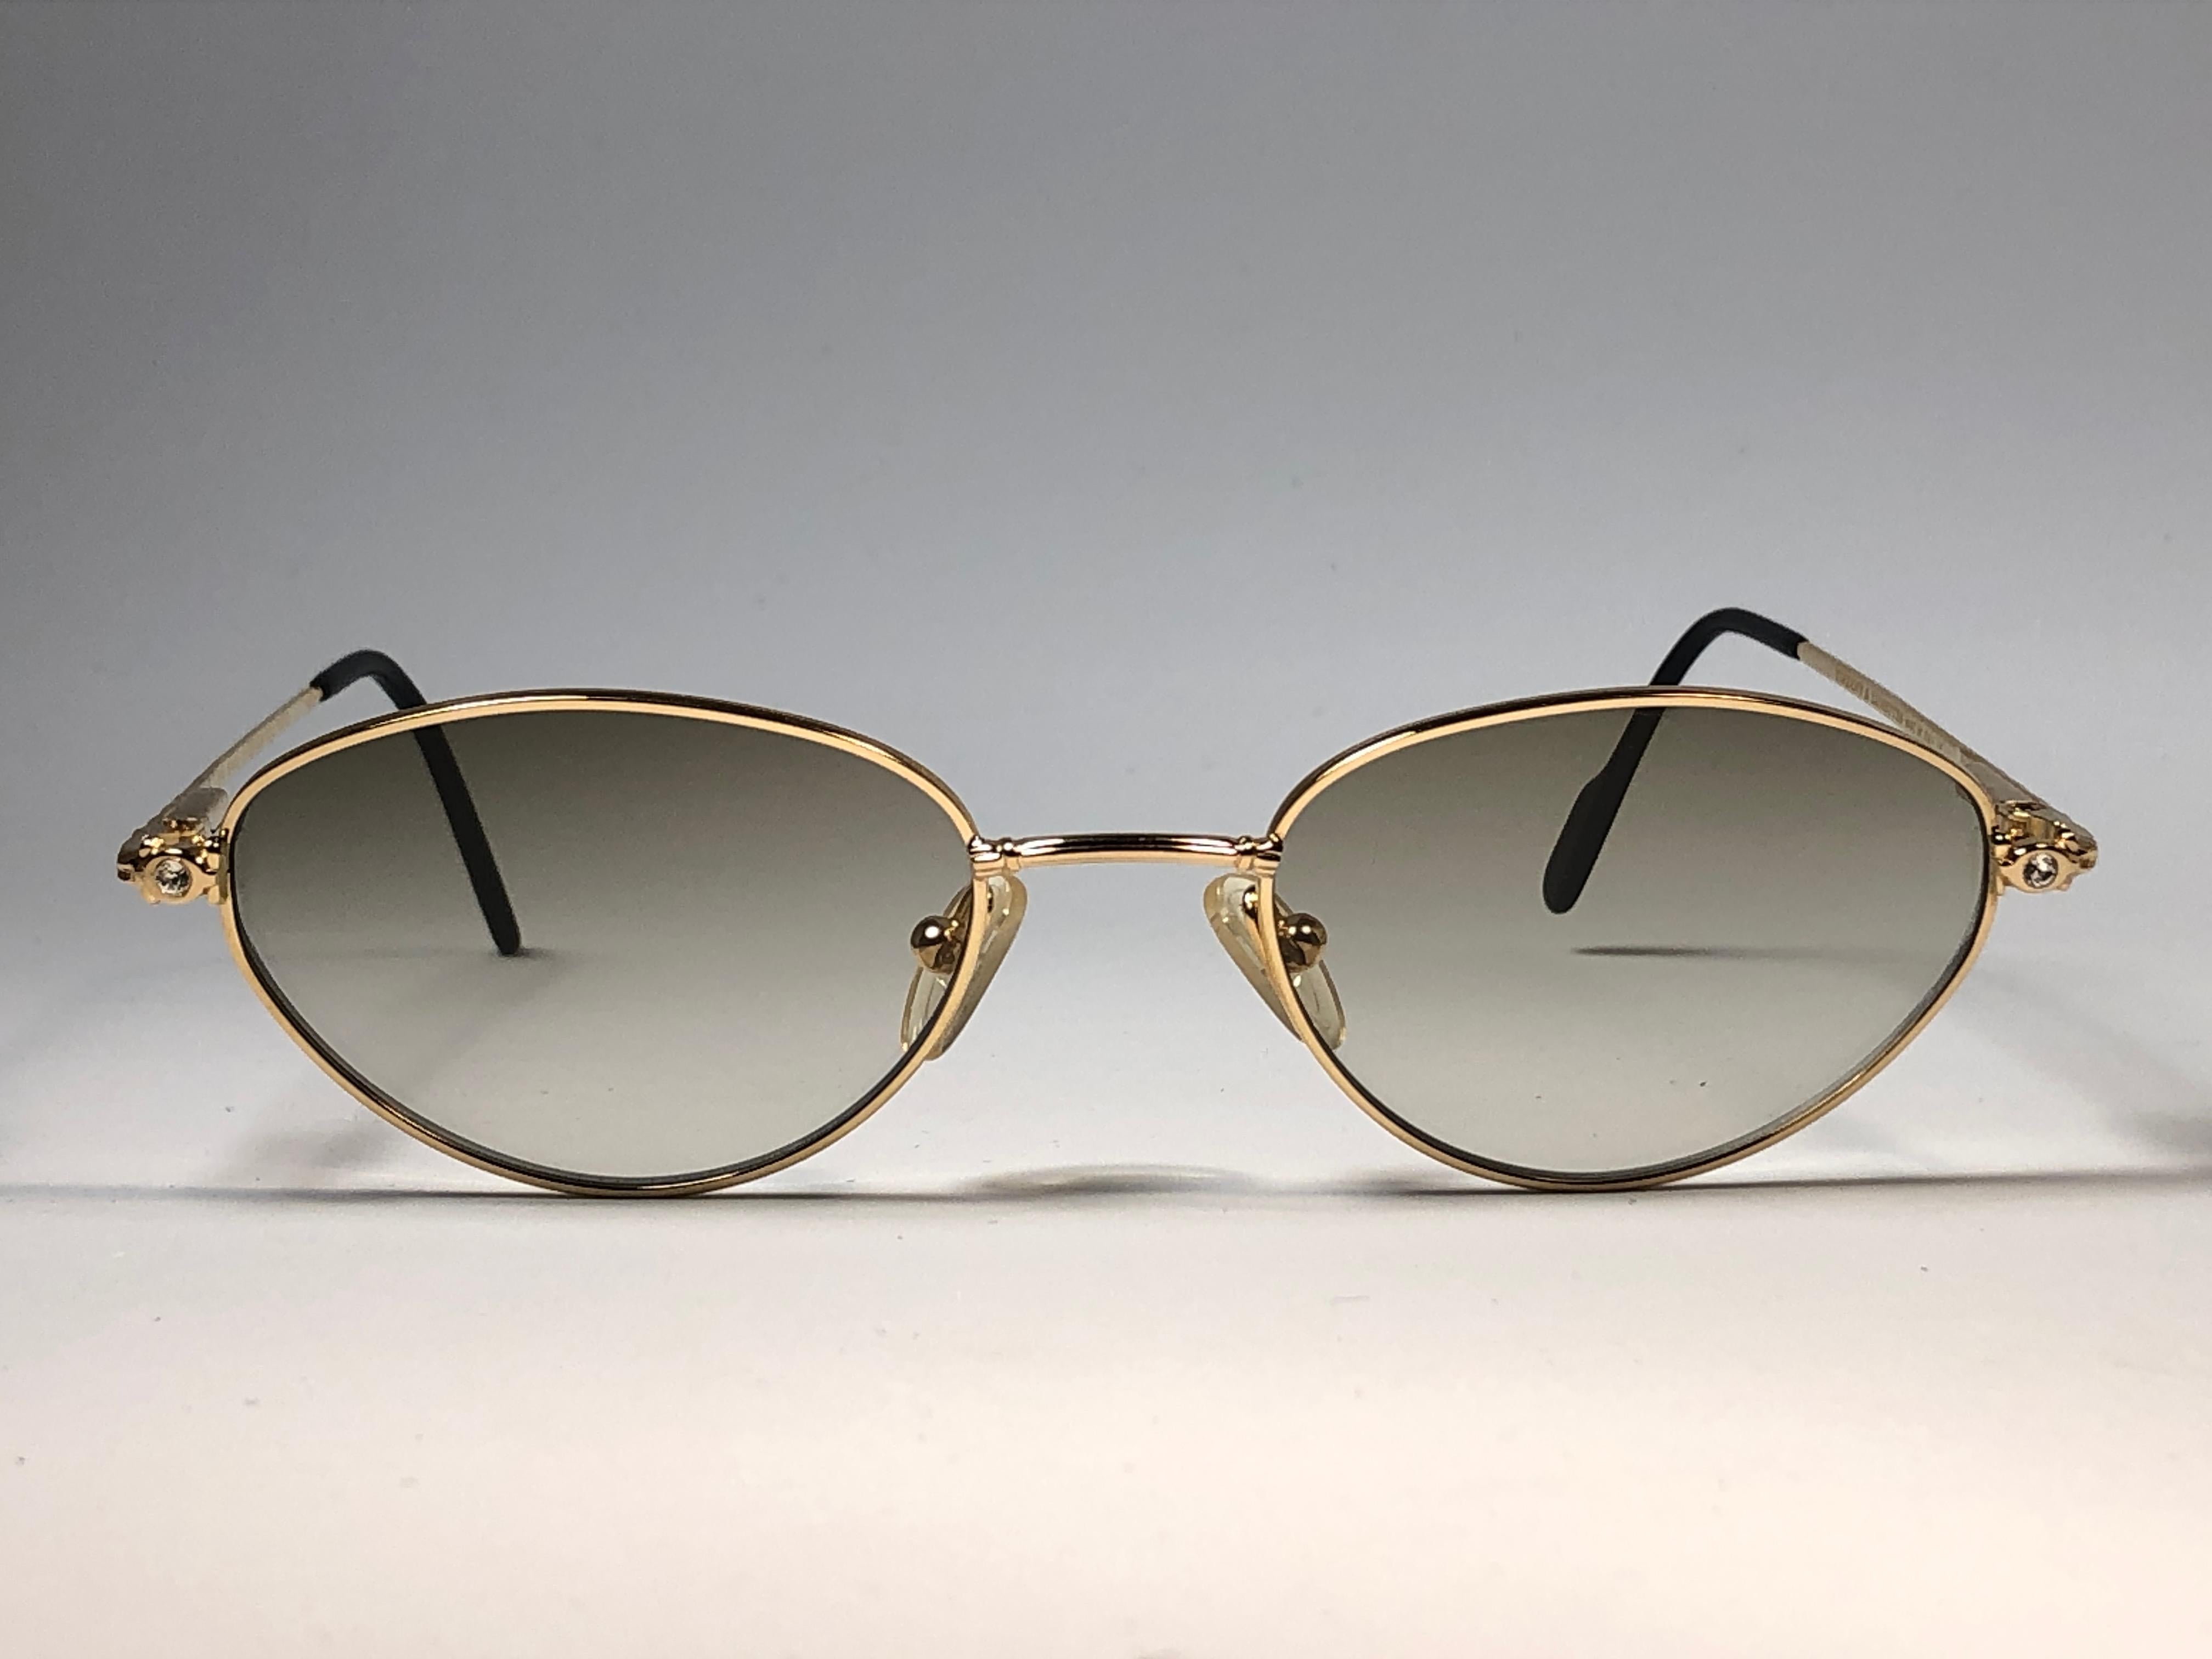 New Tiffany gold plated cat eyes frame. Spotless brown gradient lenses.

Made in Italy.
 
Produced and design in 1990's.

This item may show minor sign of wear due to storage.